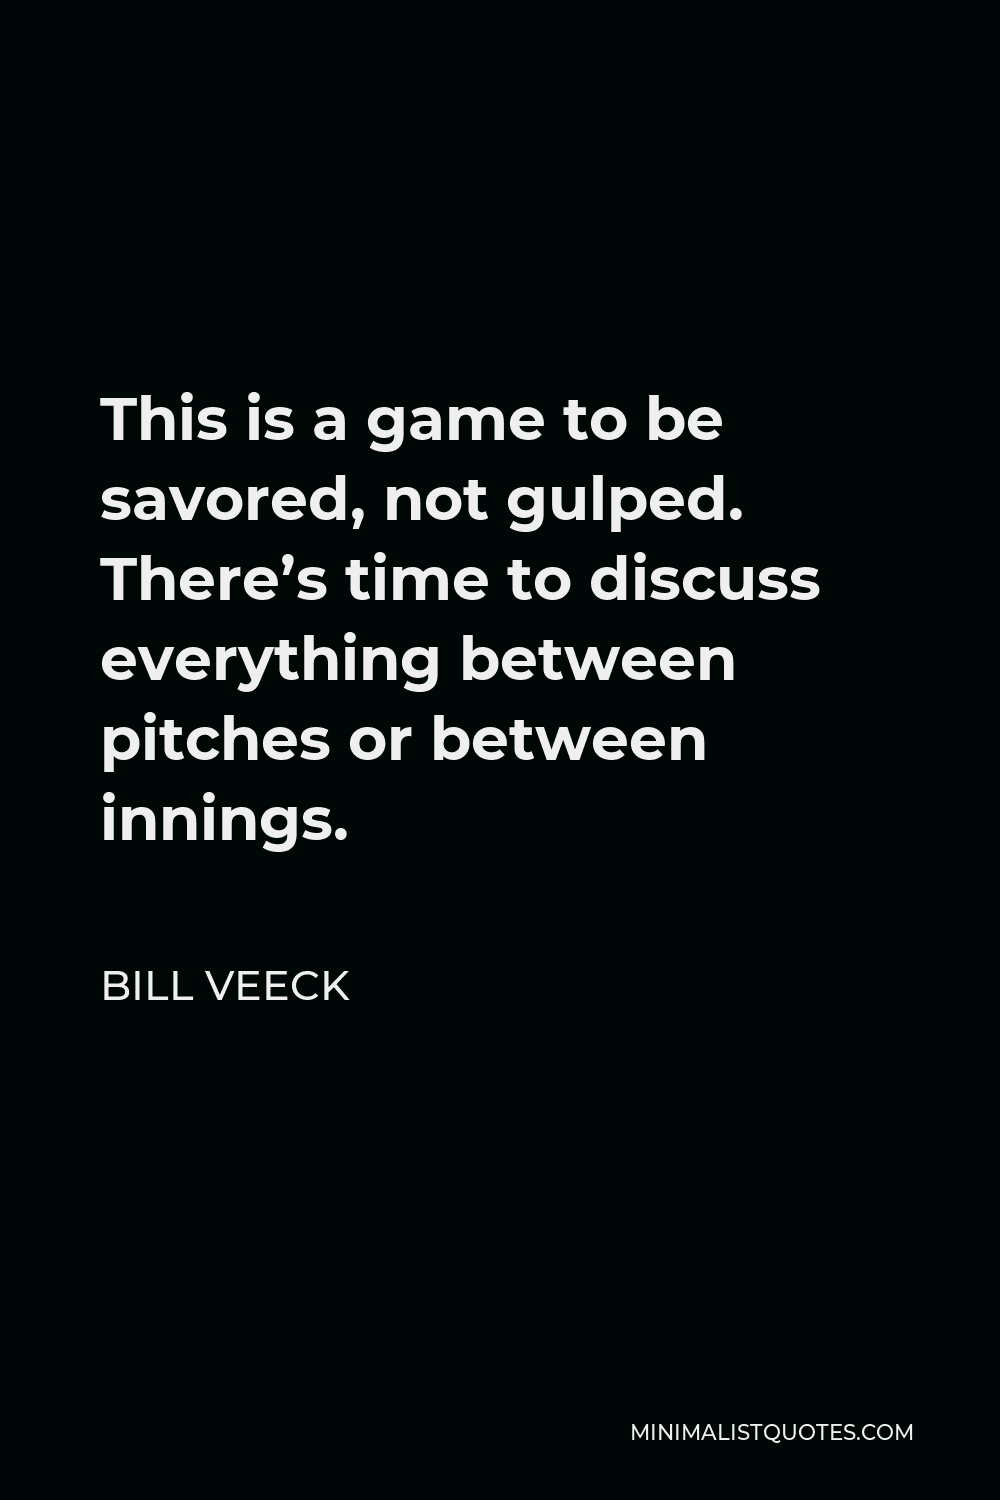 Bill Veeck Quote - This is a game to be savored, not gulped. There’s time to discuss everything between pitches or between innings.